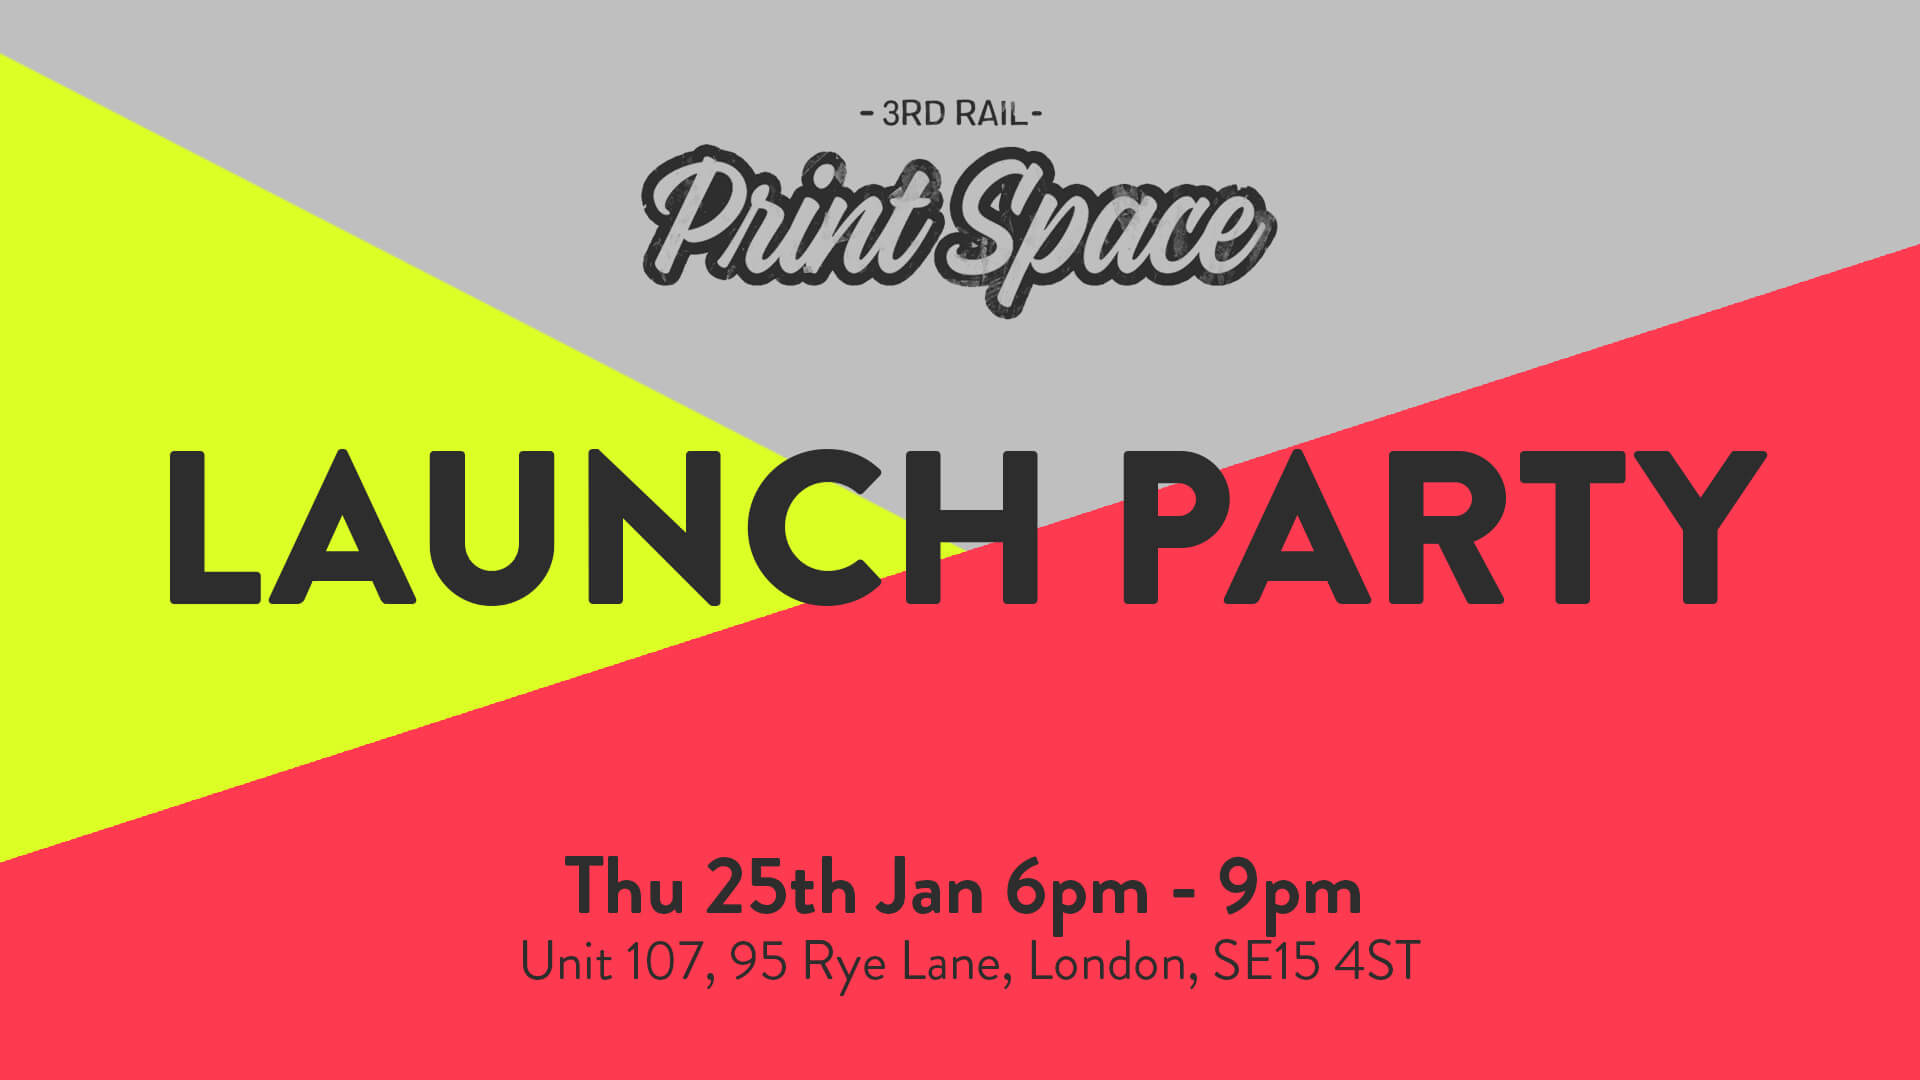 London’s Biggest Open Access Screen Printing Studio is Launching